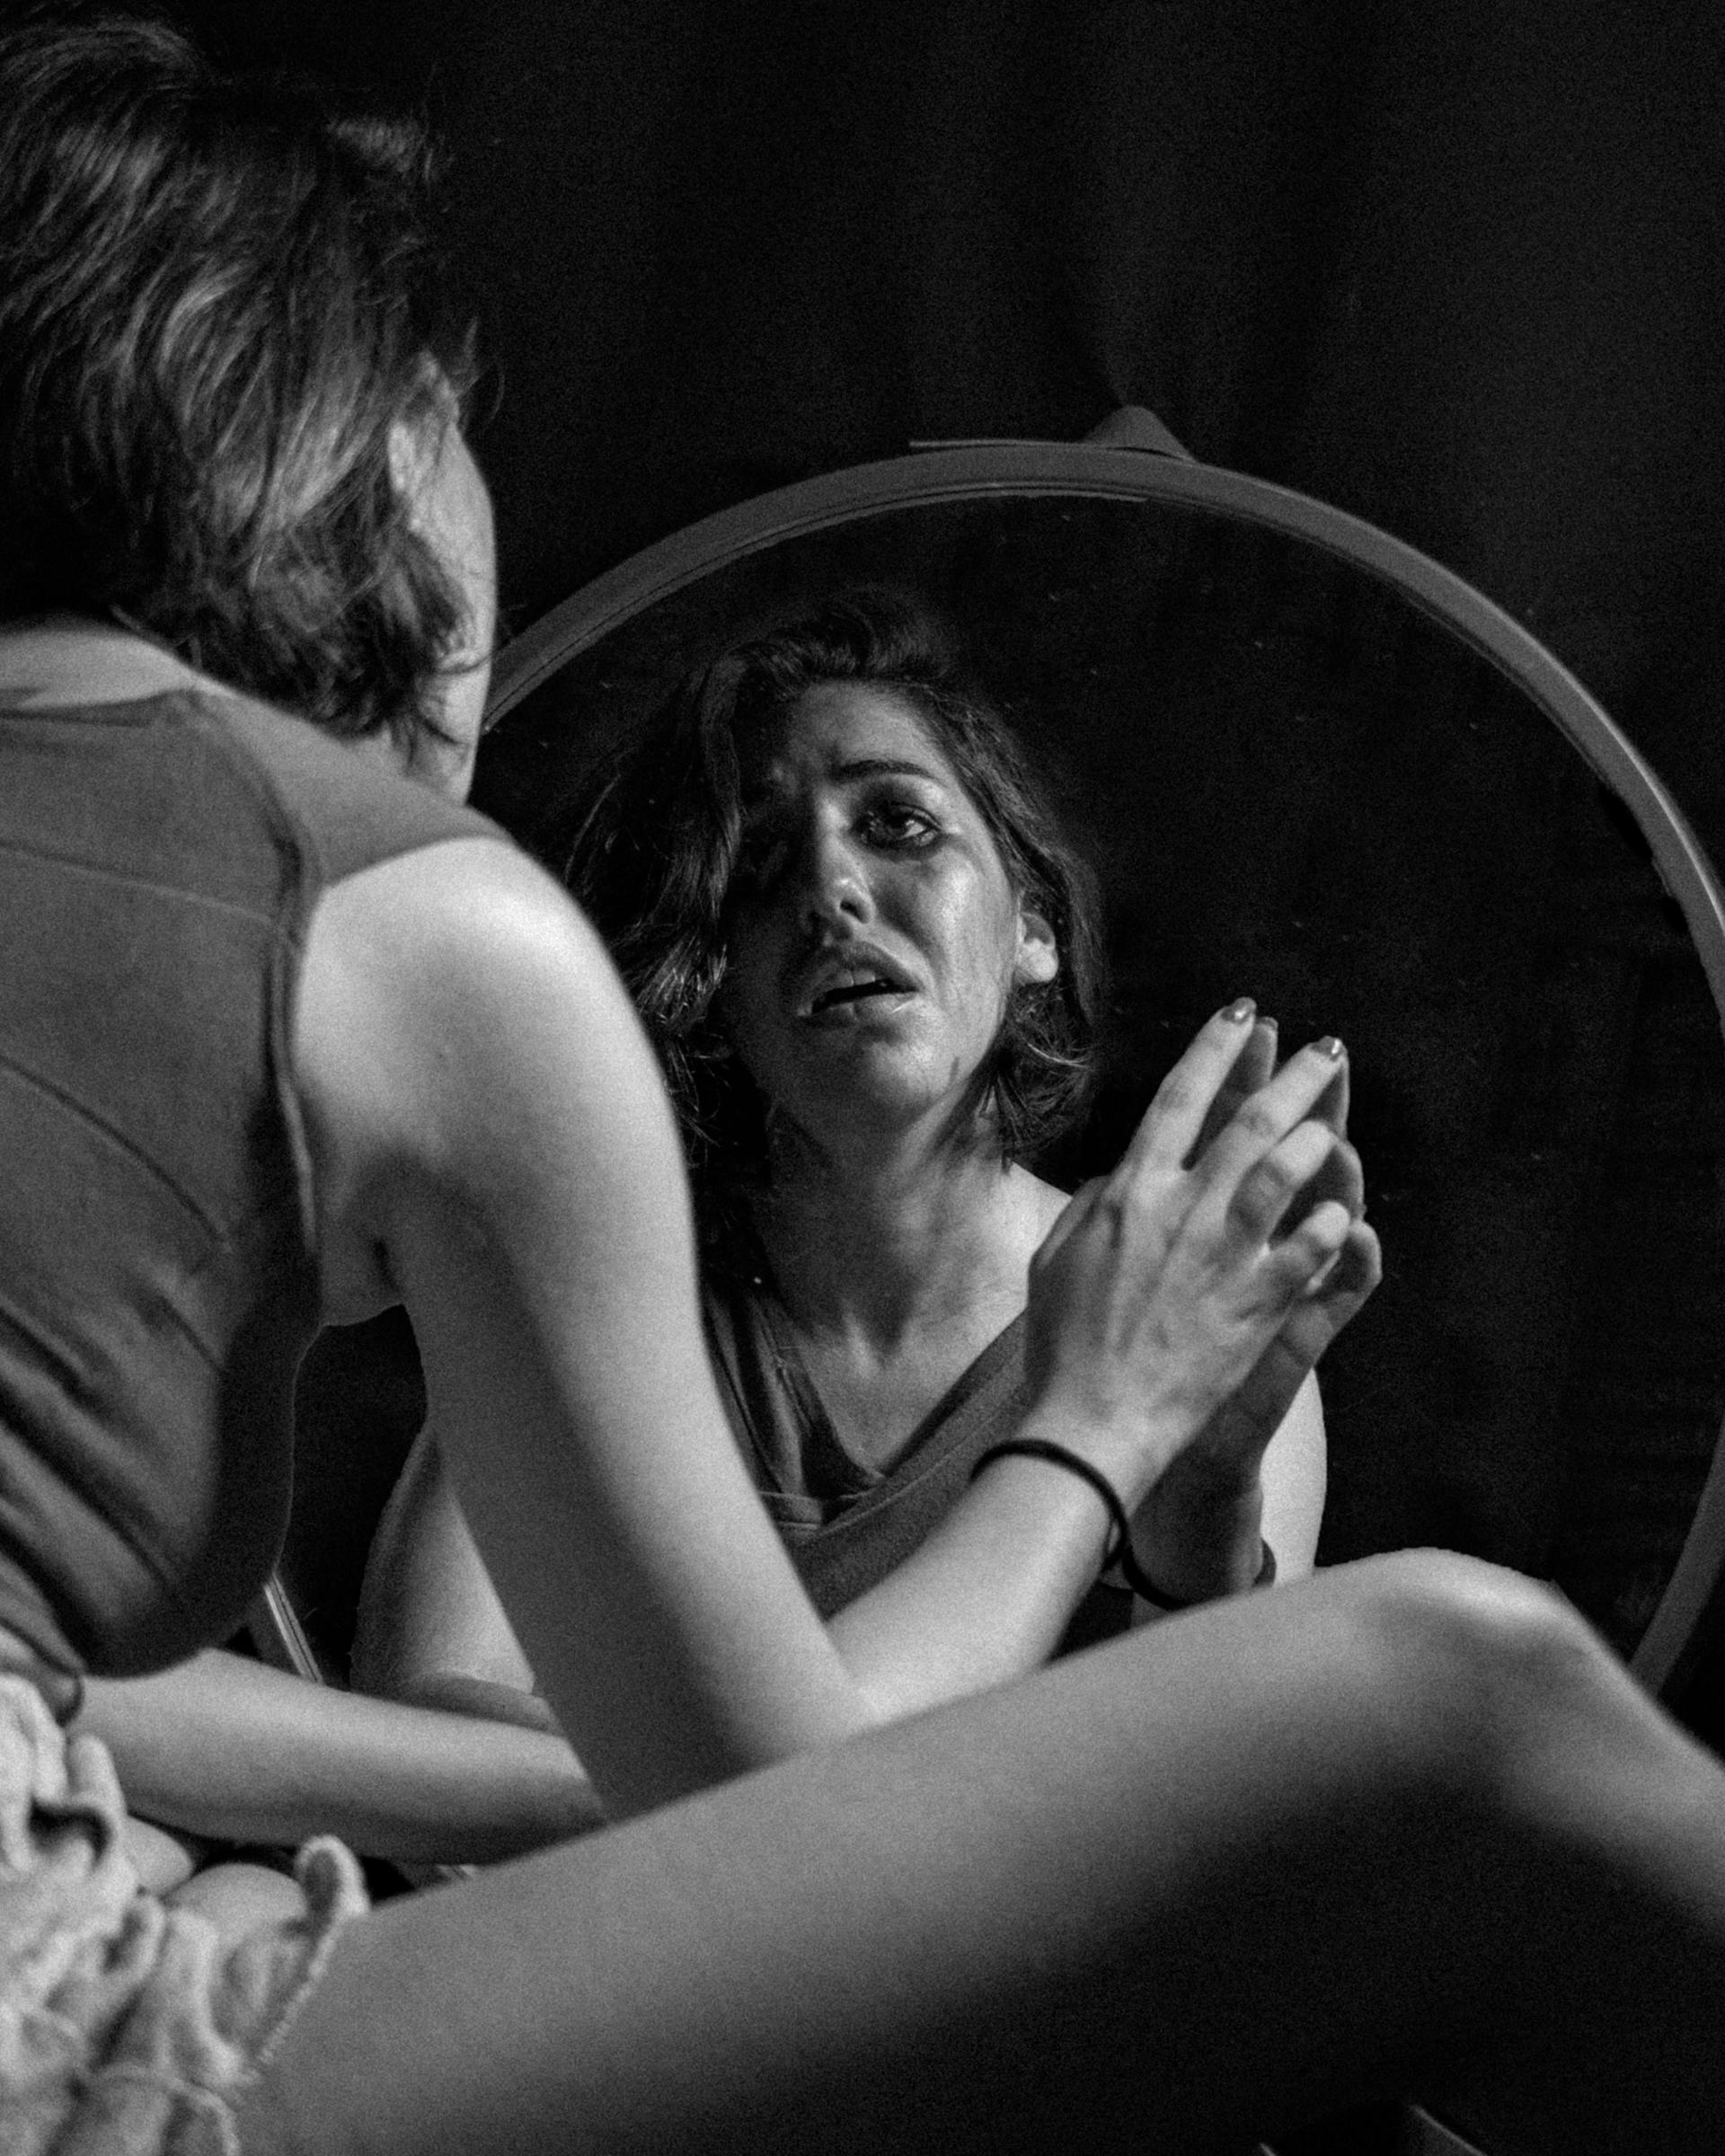 A grayscale photo of a crying woman looking in the mirror | Source: Pexels